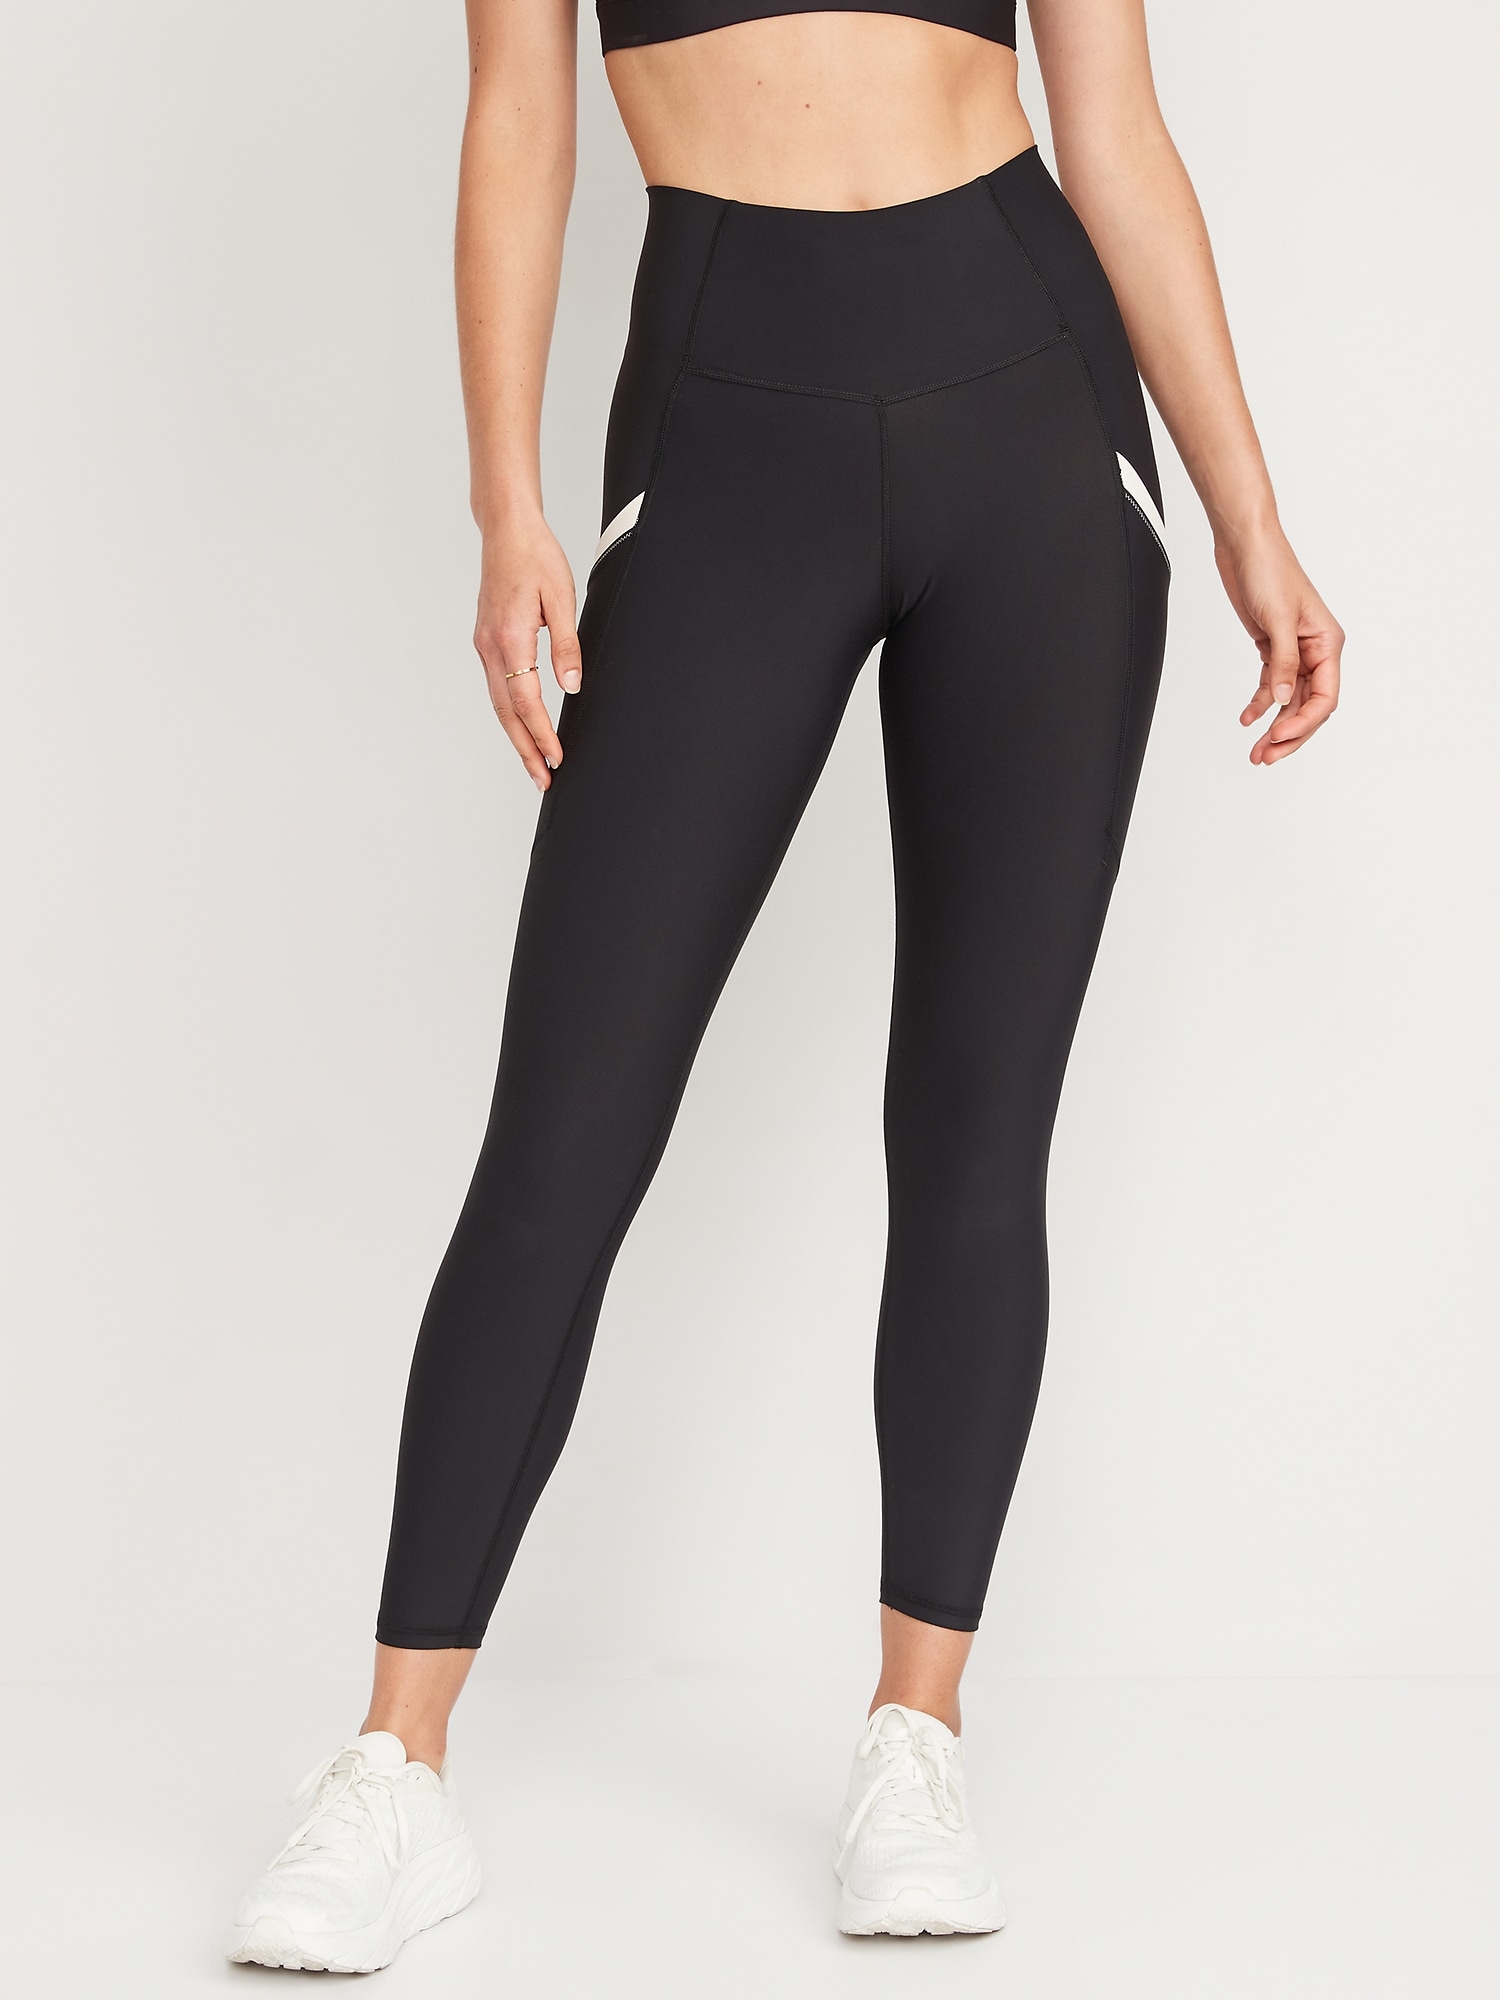 Womens Activewear, Workout Legging with Side Pockets